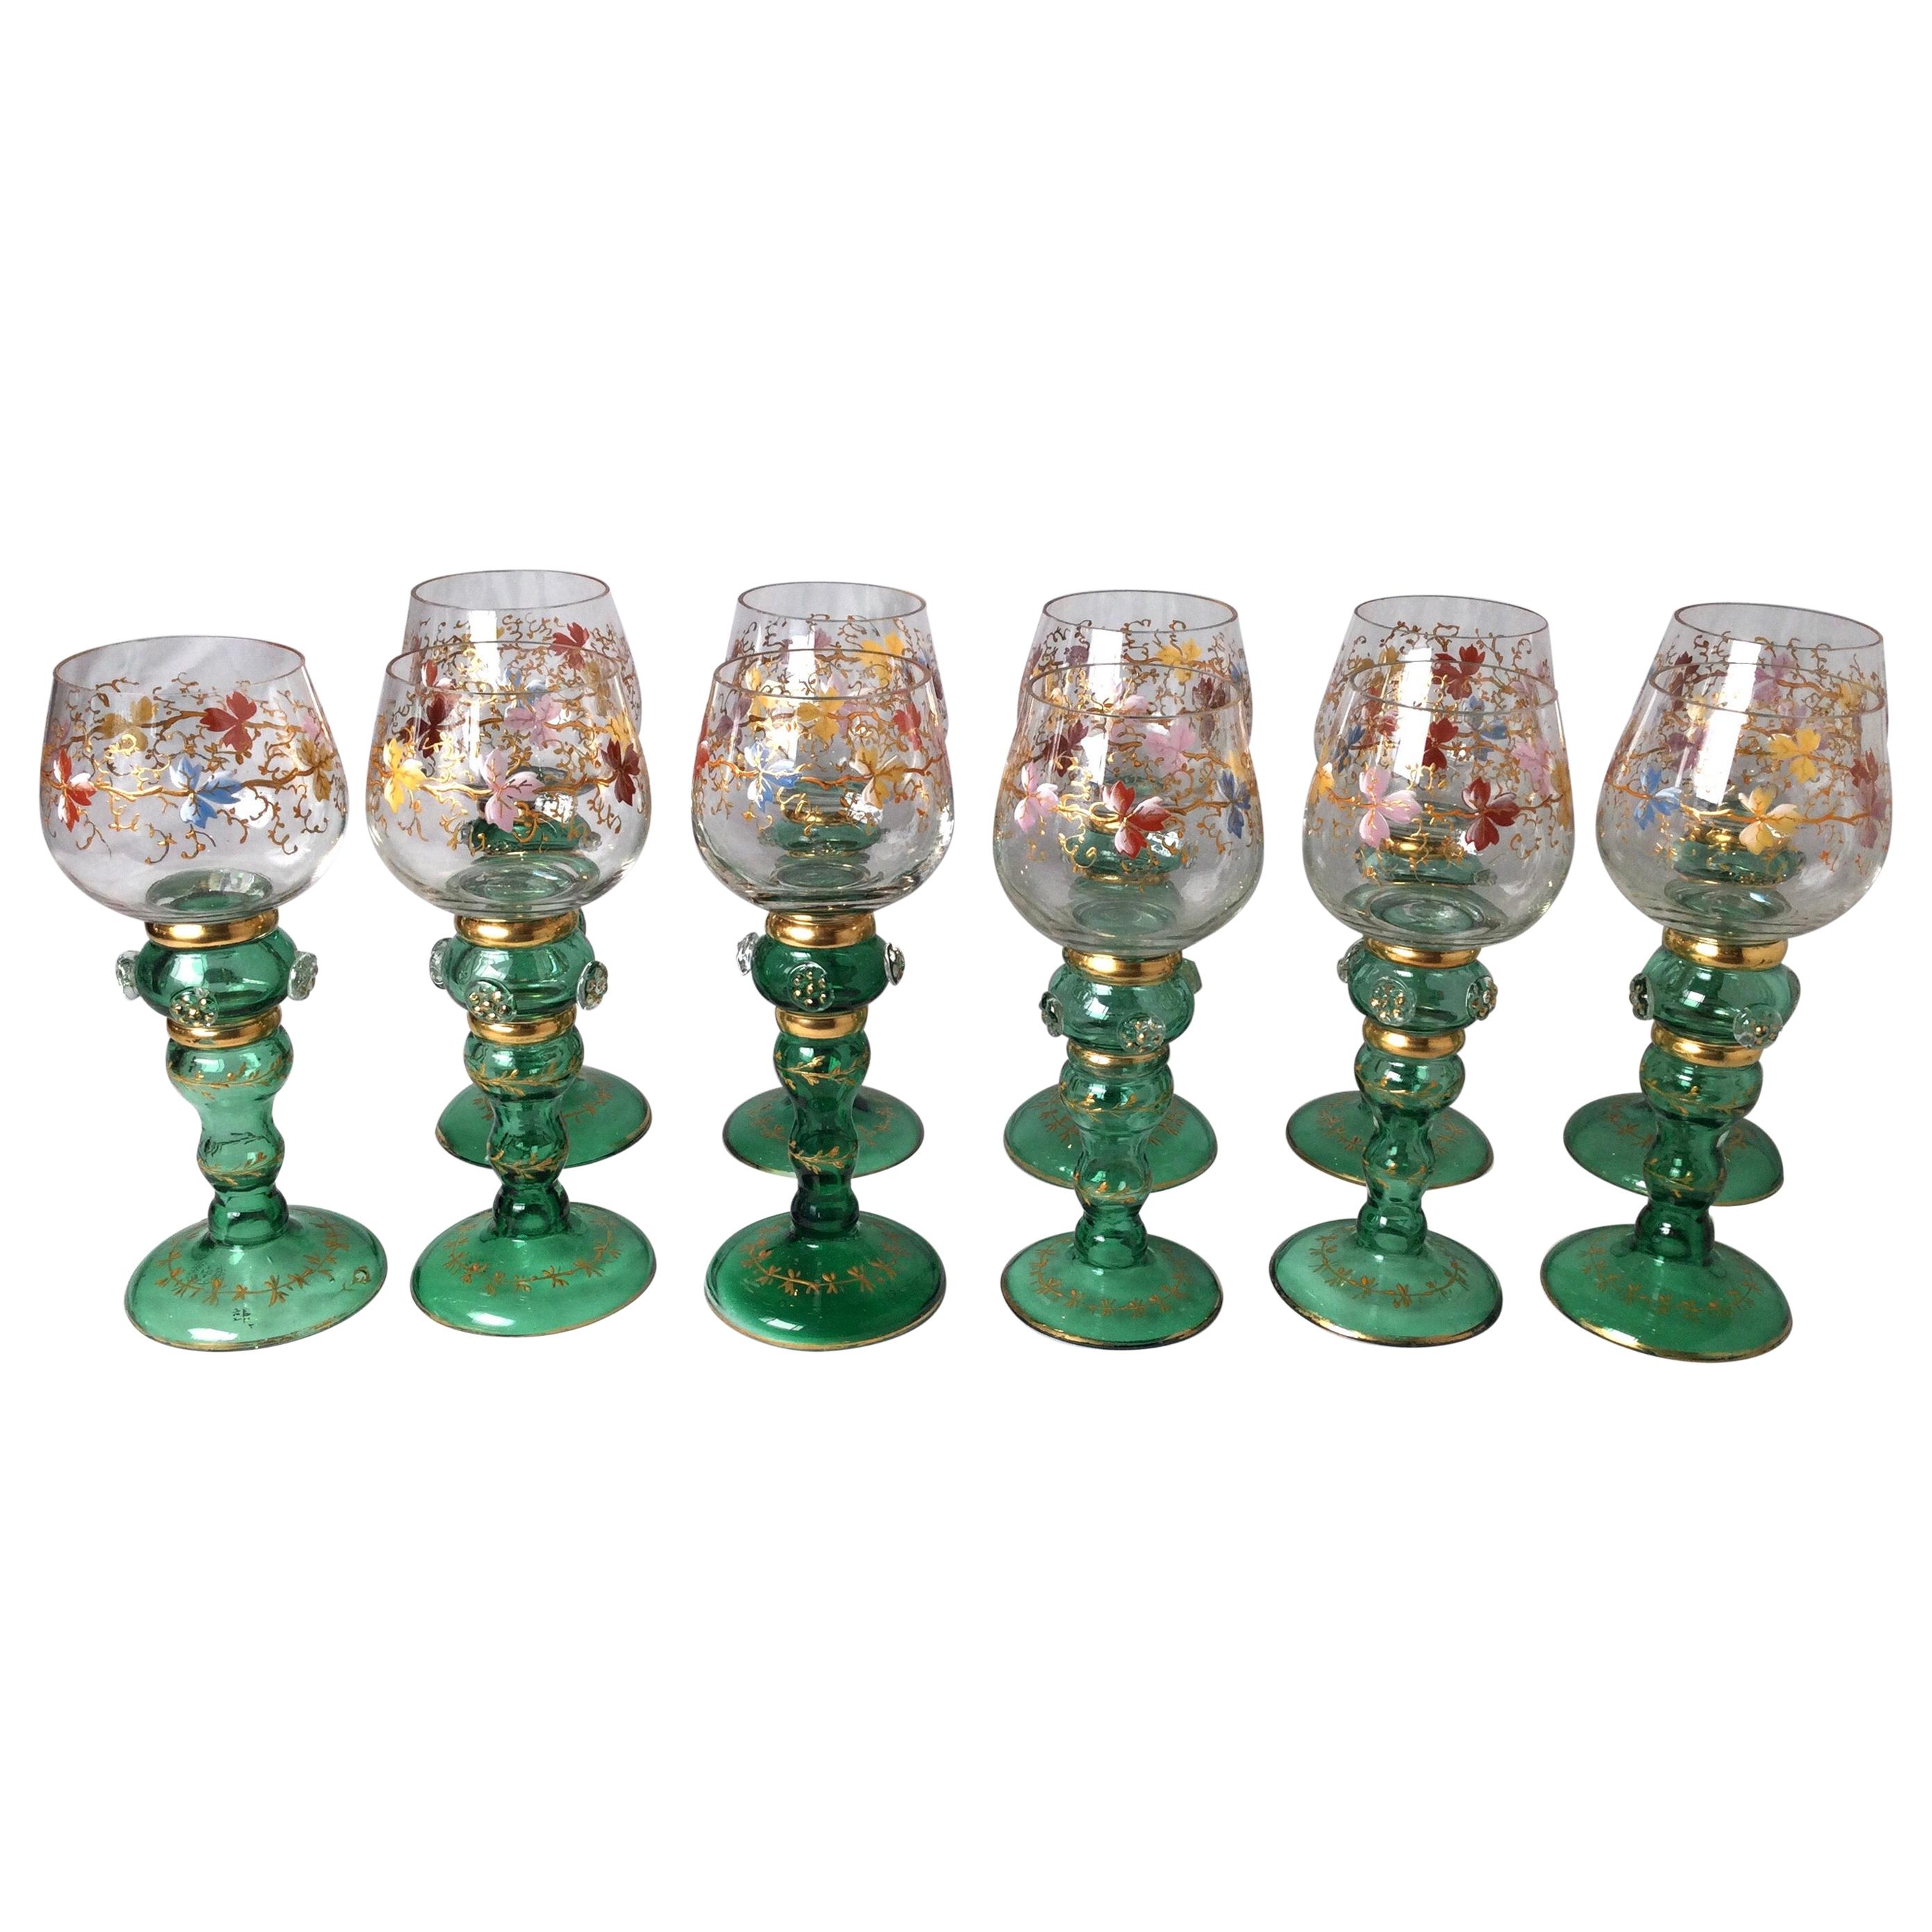 Set of 11 Moser Enameled Hand Painted Hand Blown Glass Wine Glasses